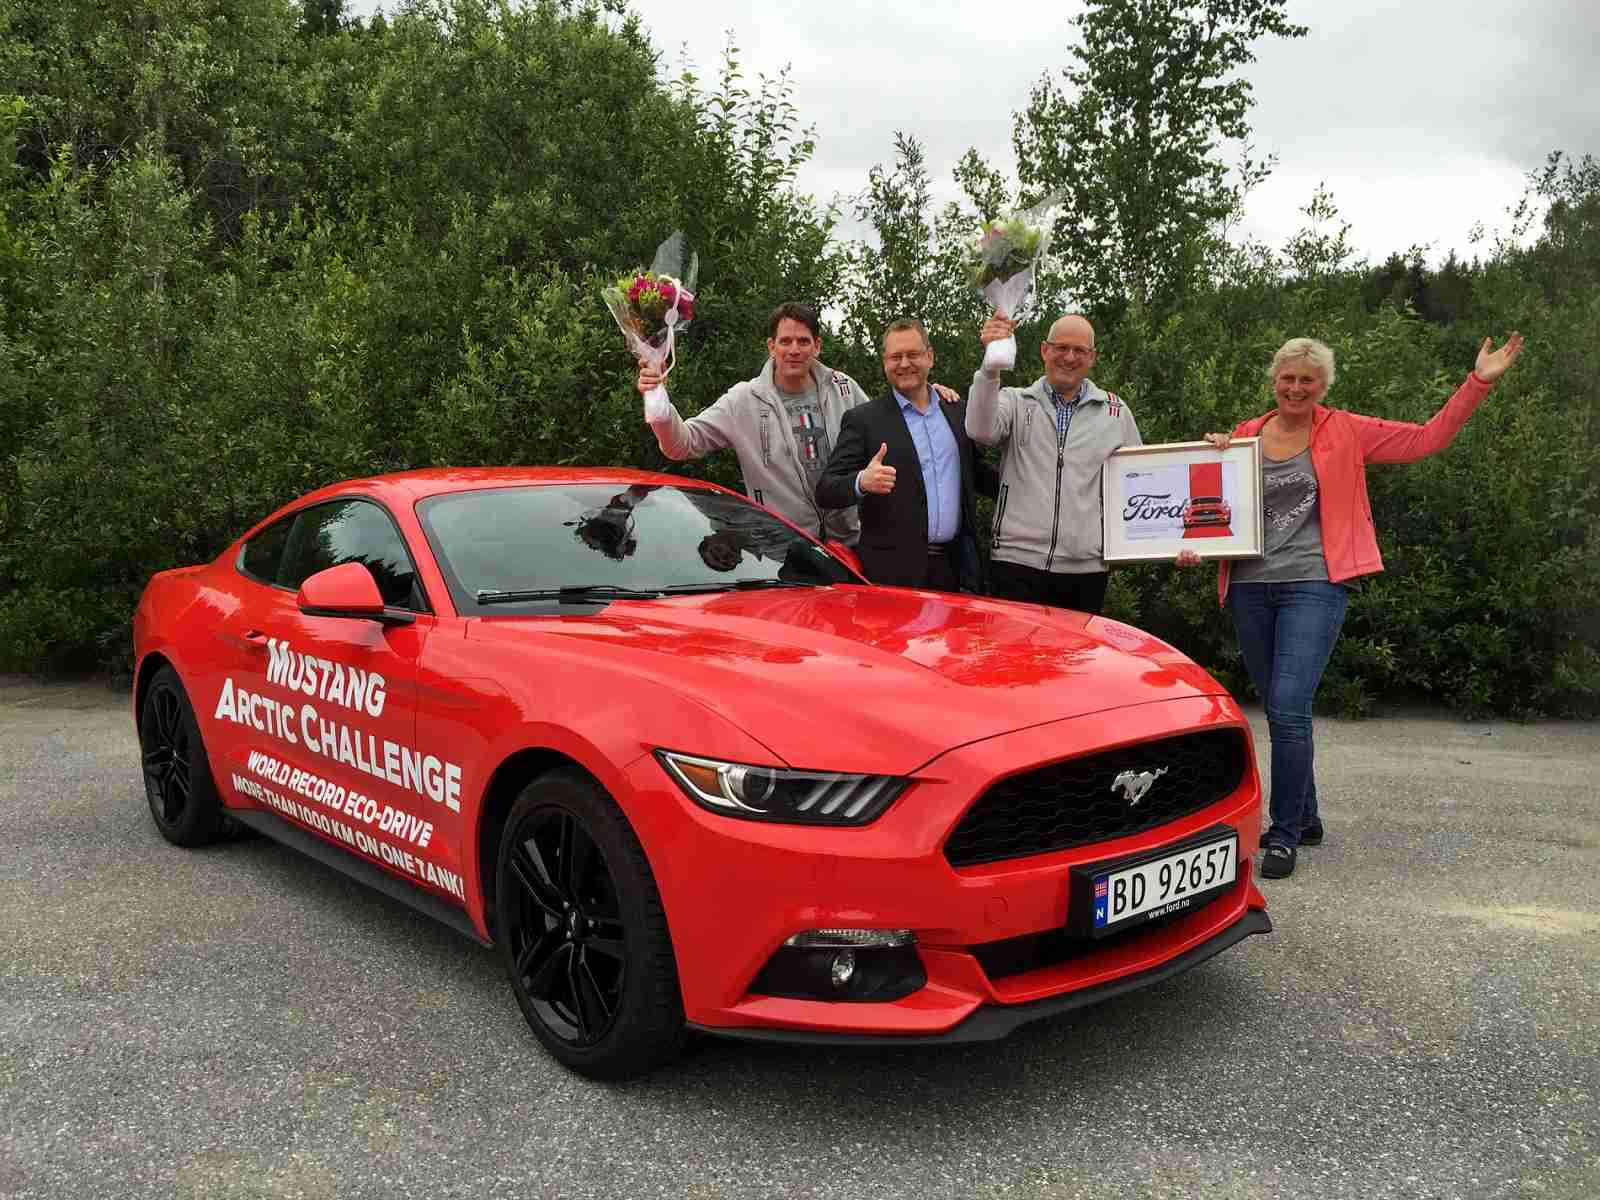 Wilthil-a-Borchgrevink-rekord-Ford-Mustang-1249-km